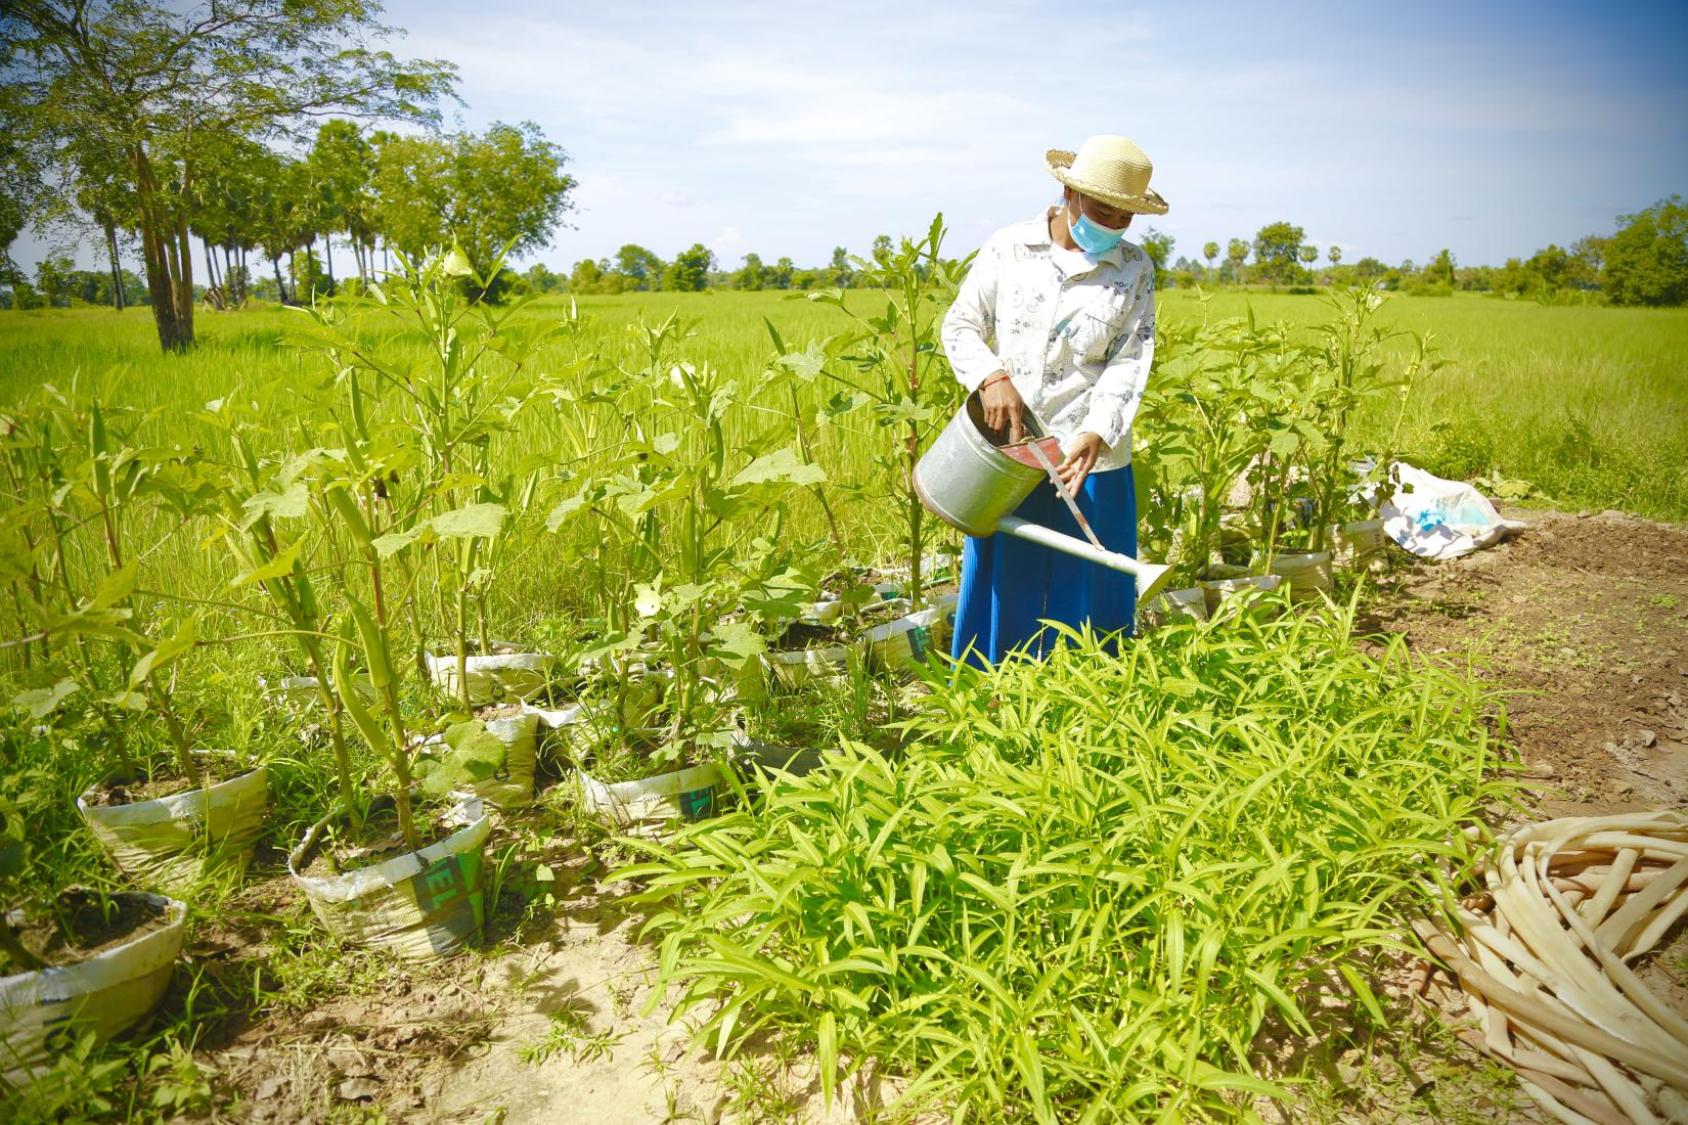 A women is watering the vegetables in the field.